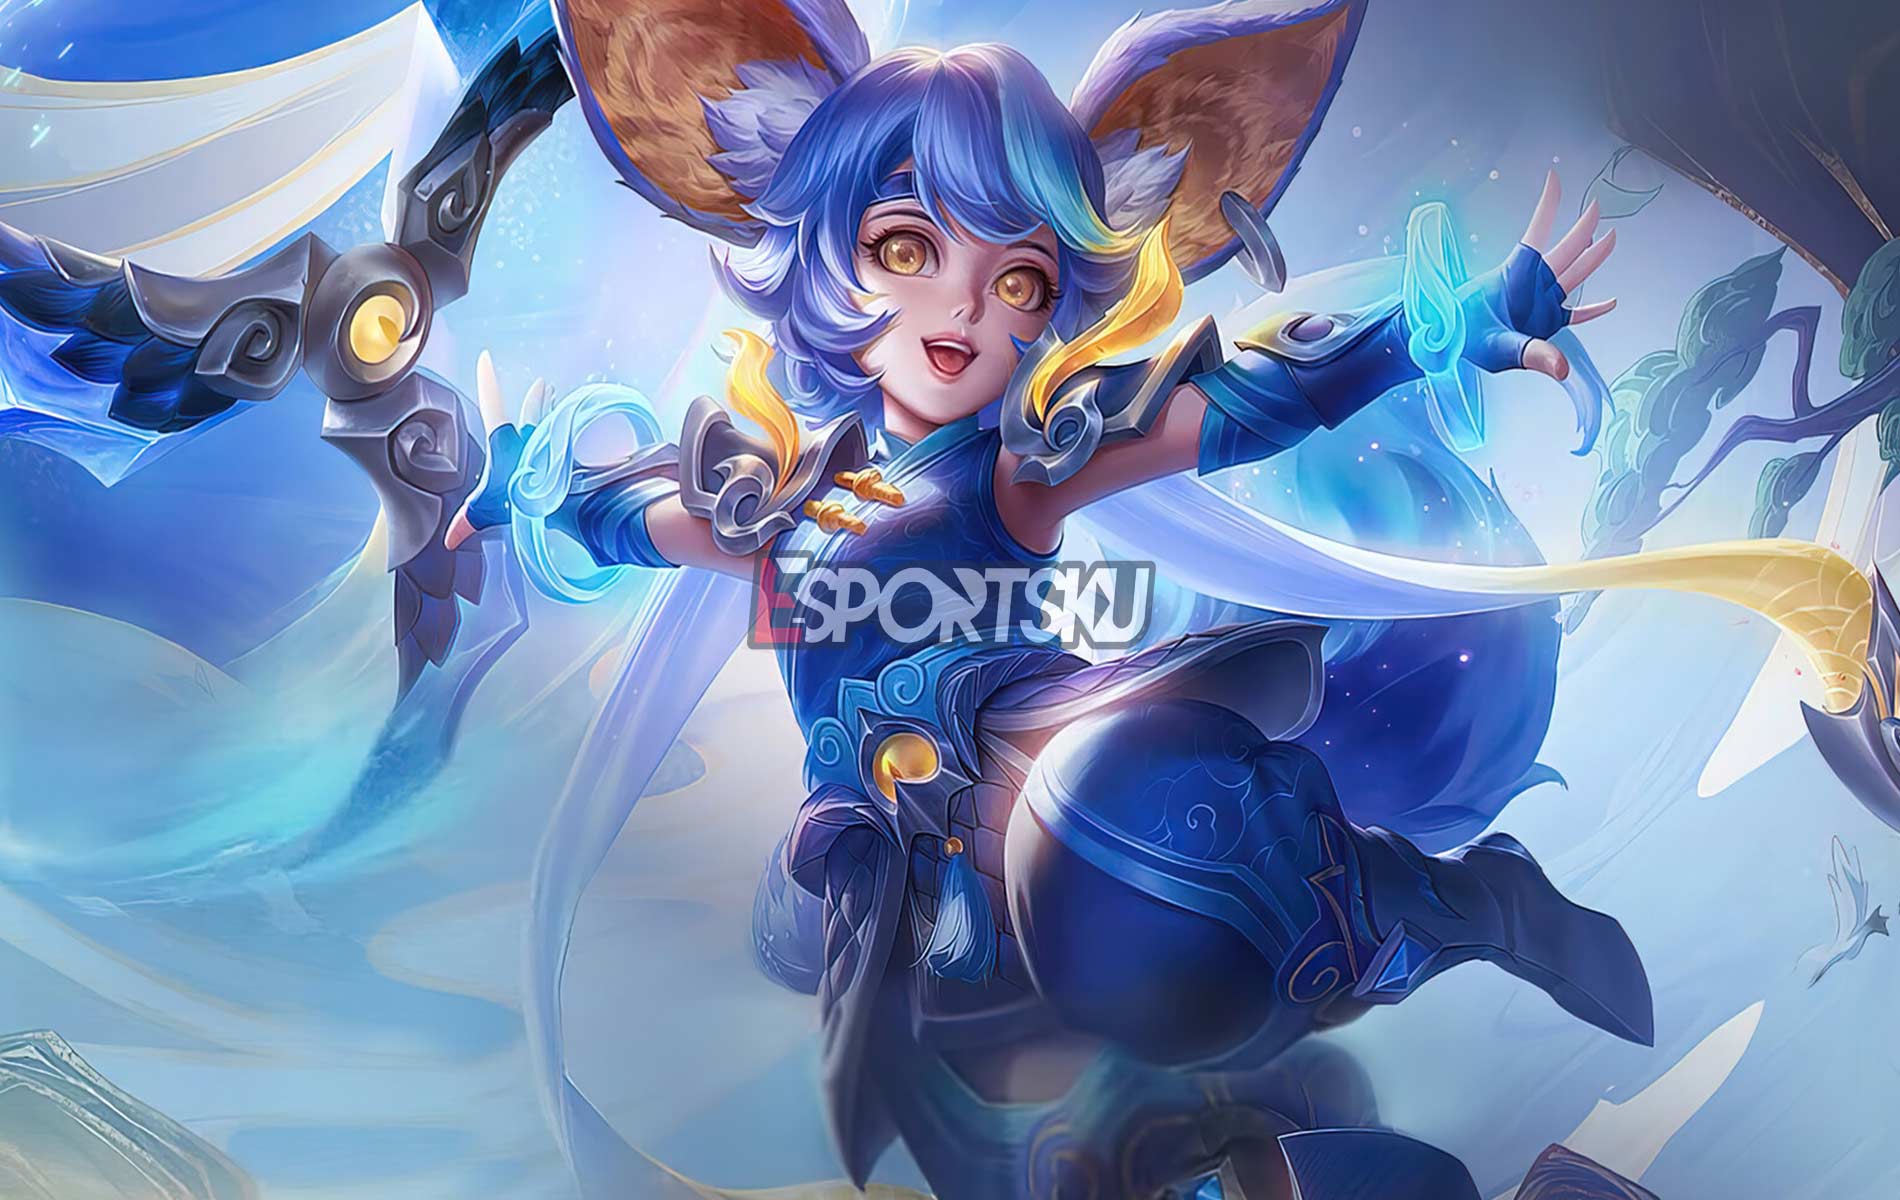 The Most Expensive Nana Skin in Mobile Legends (ML)